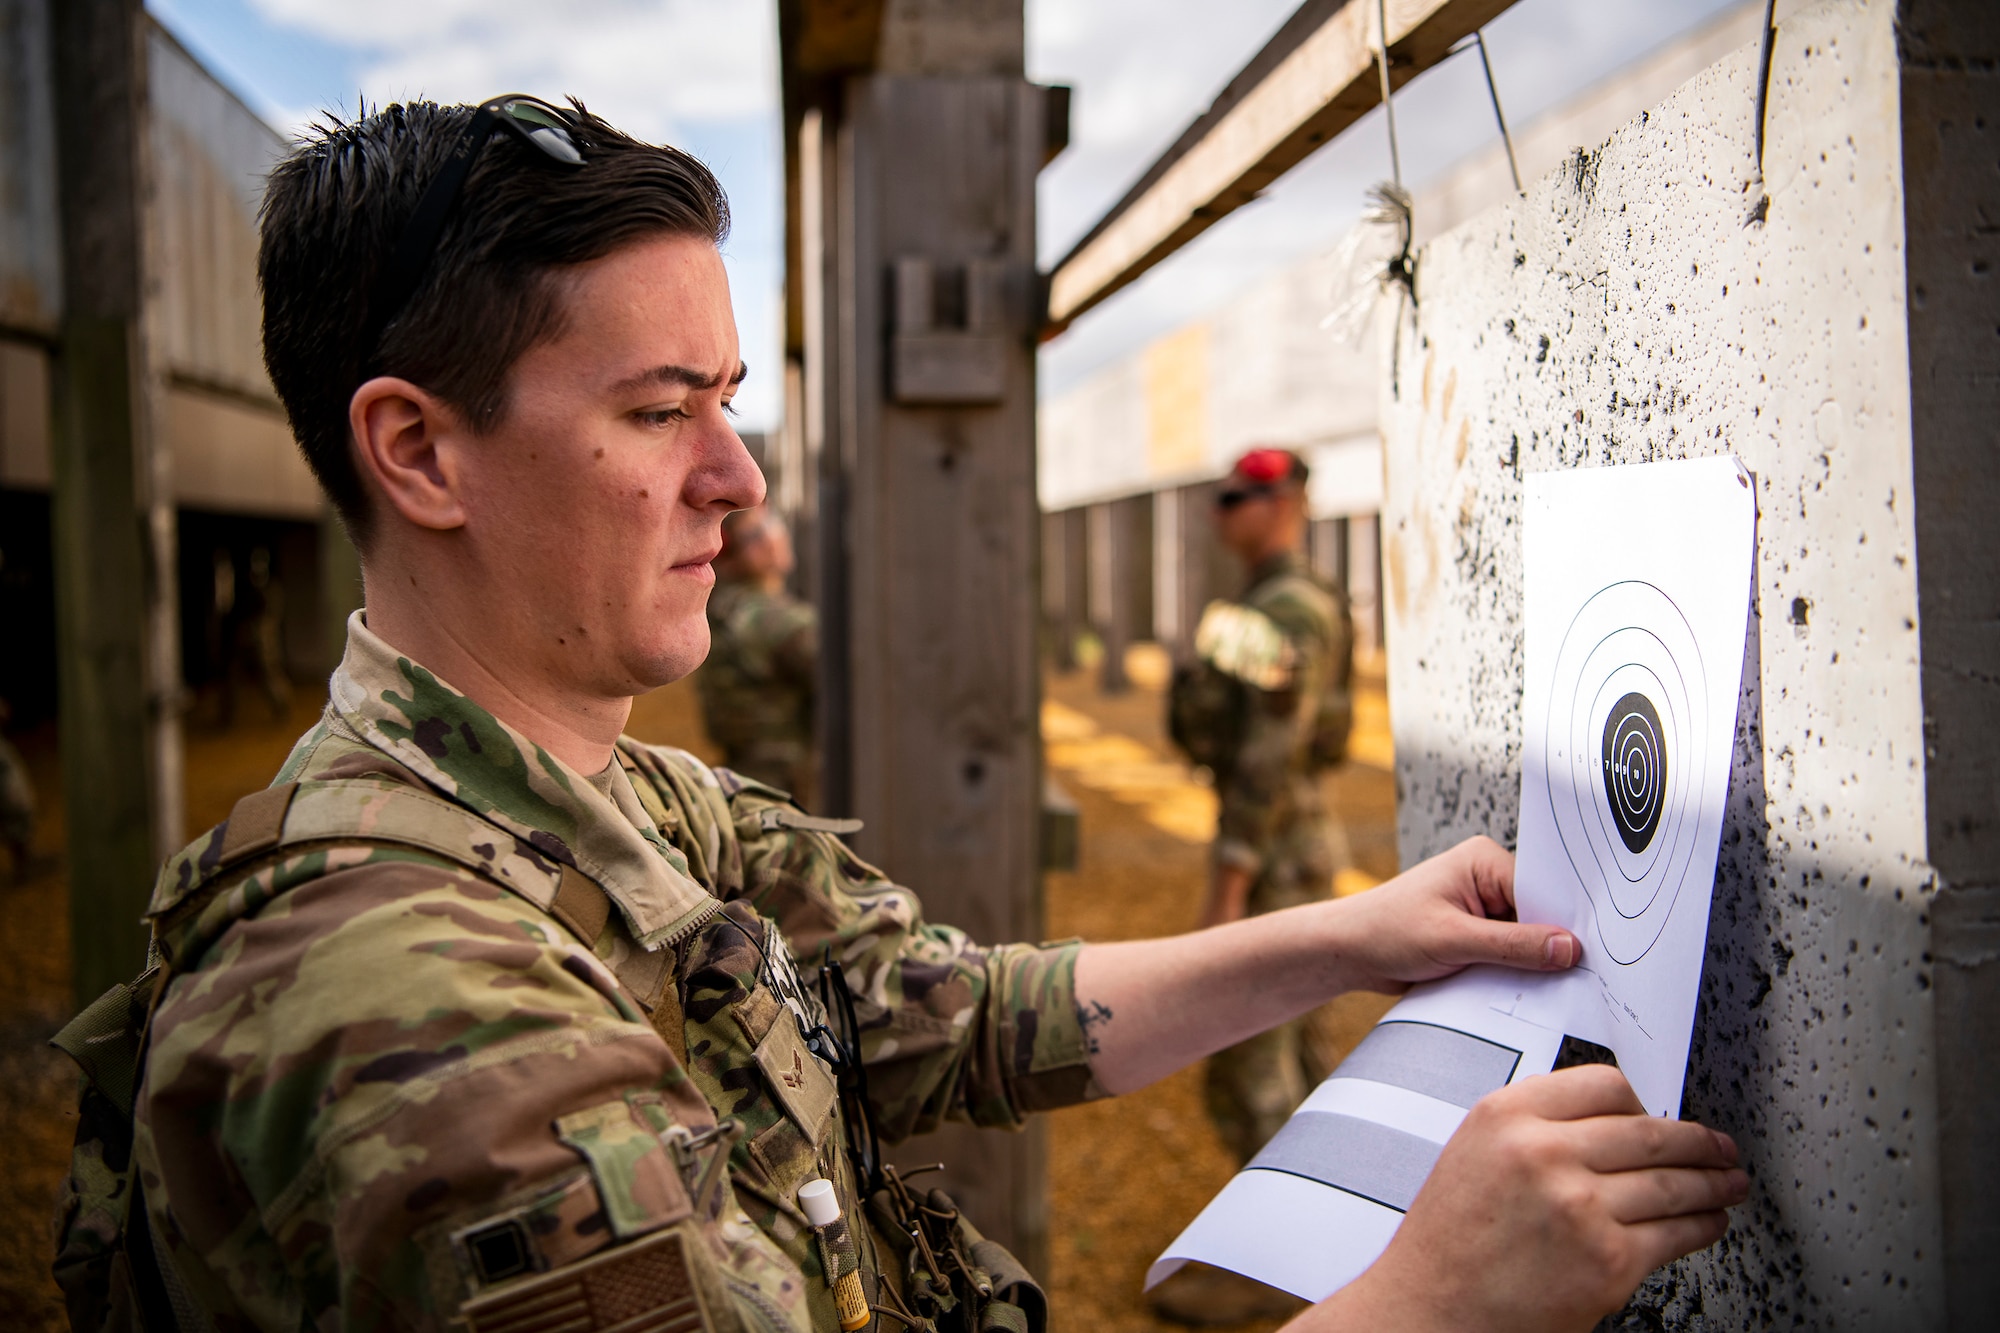 An Airman from the 423d Security Forces Squadron places a target sheet during a proficiency course at RAF Molesworth, England, Aug. 19, 2022. During the course instructors from the 820th Base Defense Group and 435th Contingency Response Group provided oversight and guidance to help critique and advance the combat arms skills of the defenders from the 423d SFS. (U.S. Air Force photo by Staff Sgt. Eugene Oliver)